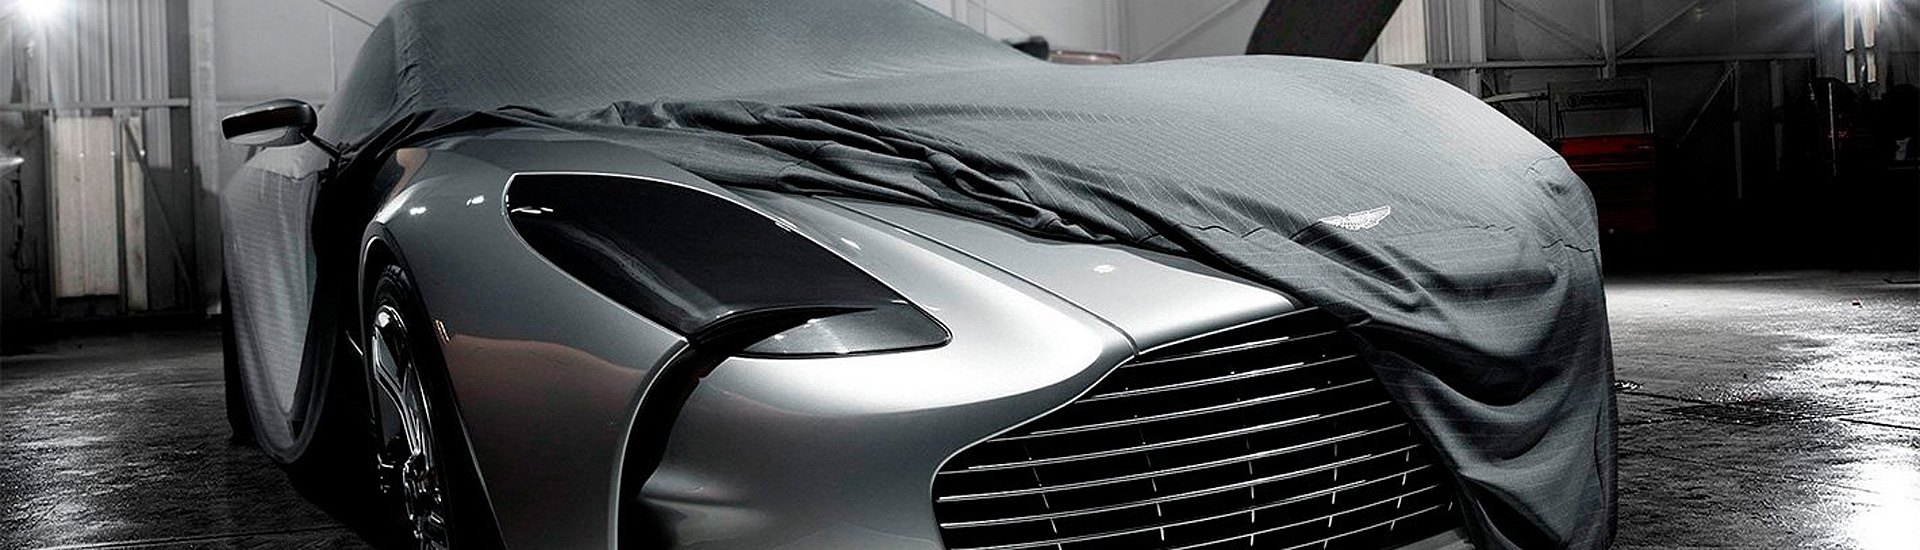 Five Reasons To Use An Indoor Cover On Your Garaged Car